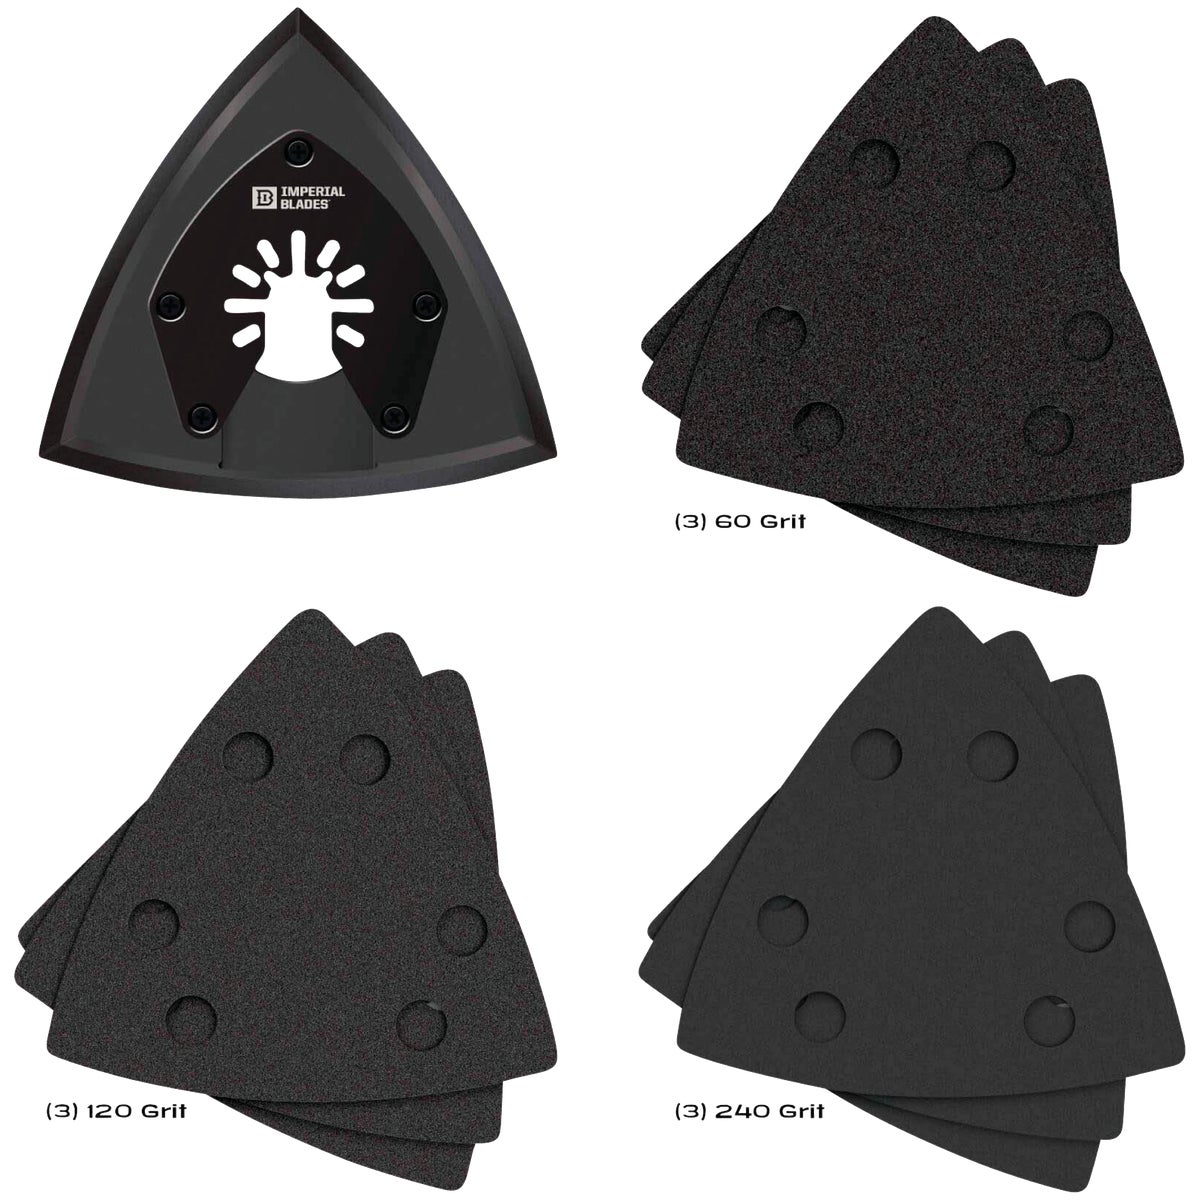 Imperial Blades ONE FIT 60/120/240 Grit Triangle Sandpaper Variety Pack w/Sanding Pad (10-Pack)